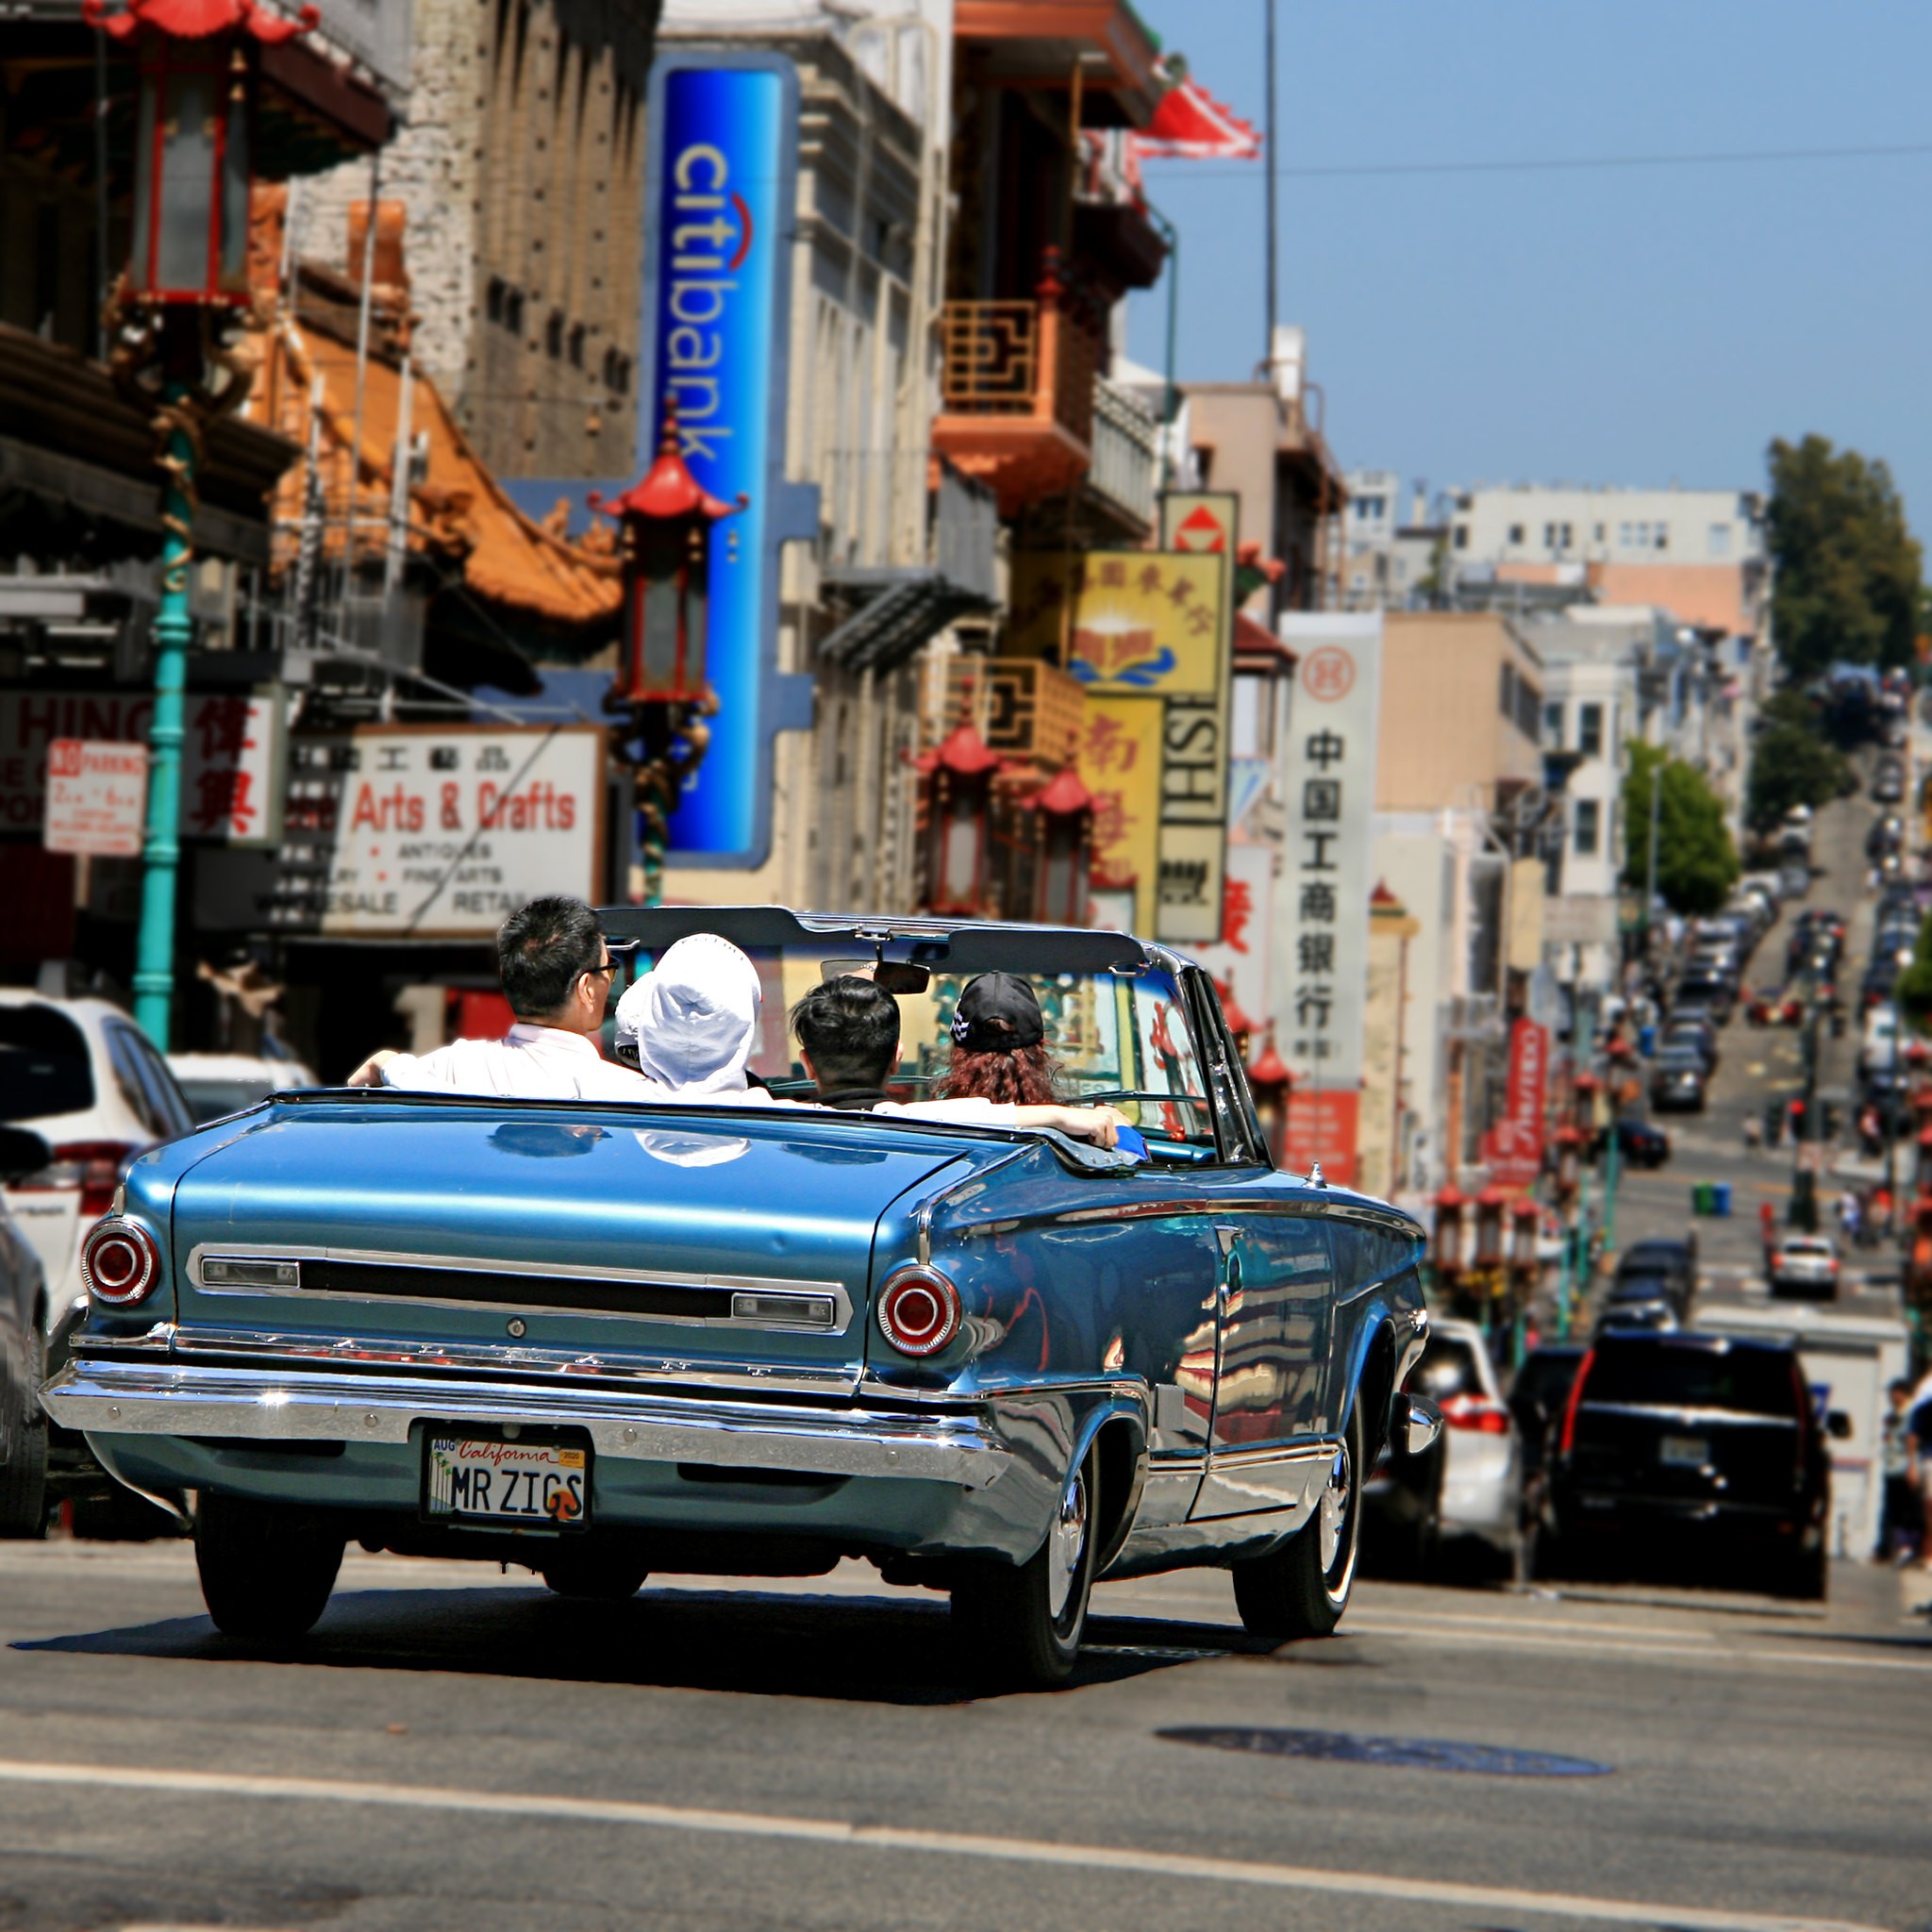 Is California Really Preparing to Restrict Classic Car Usage?